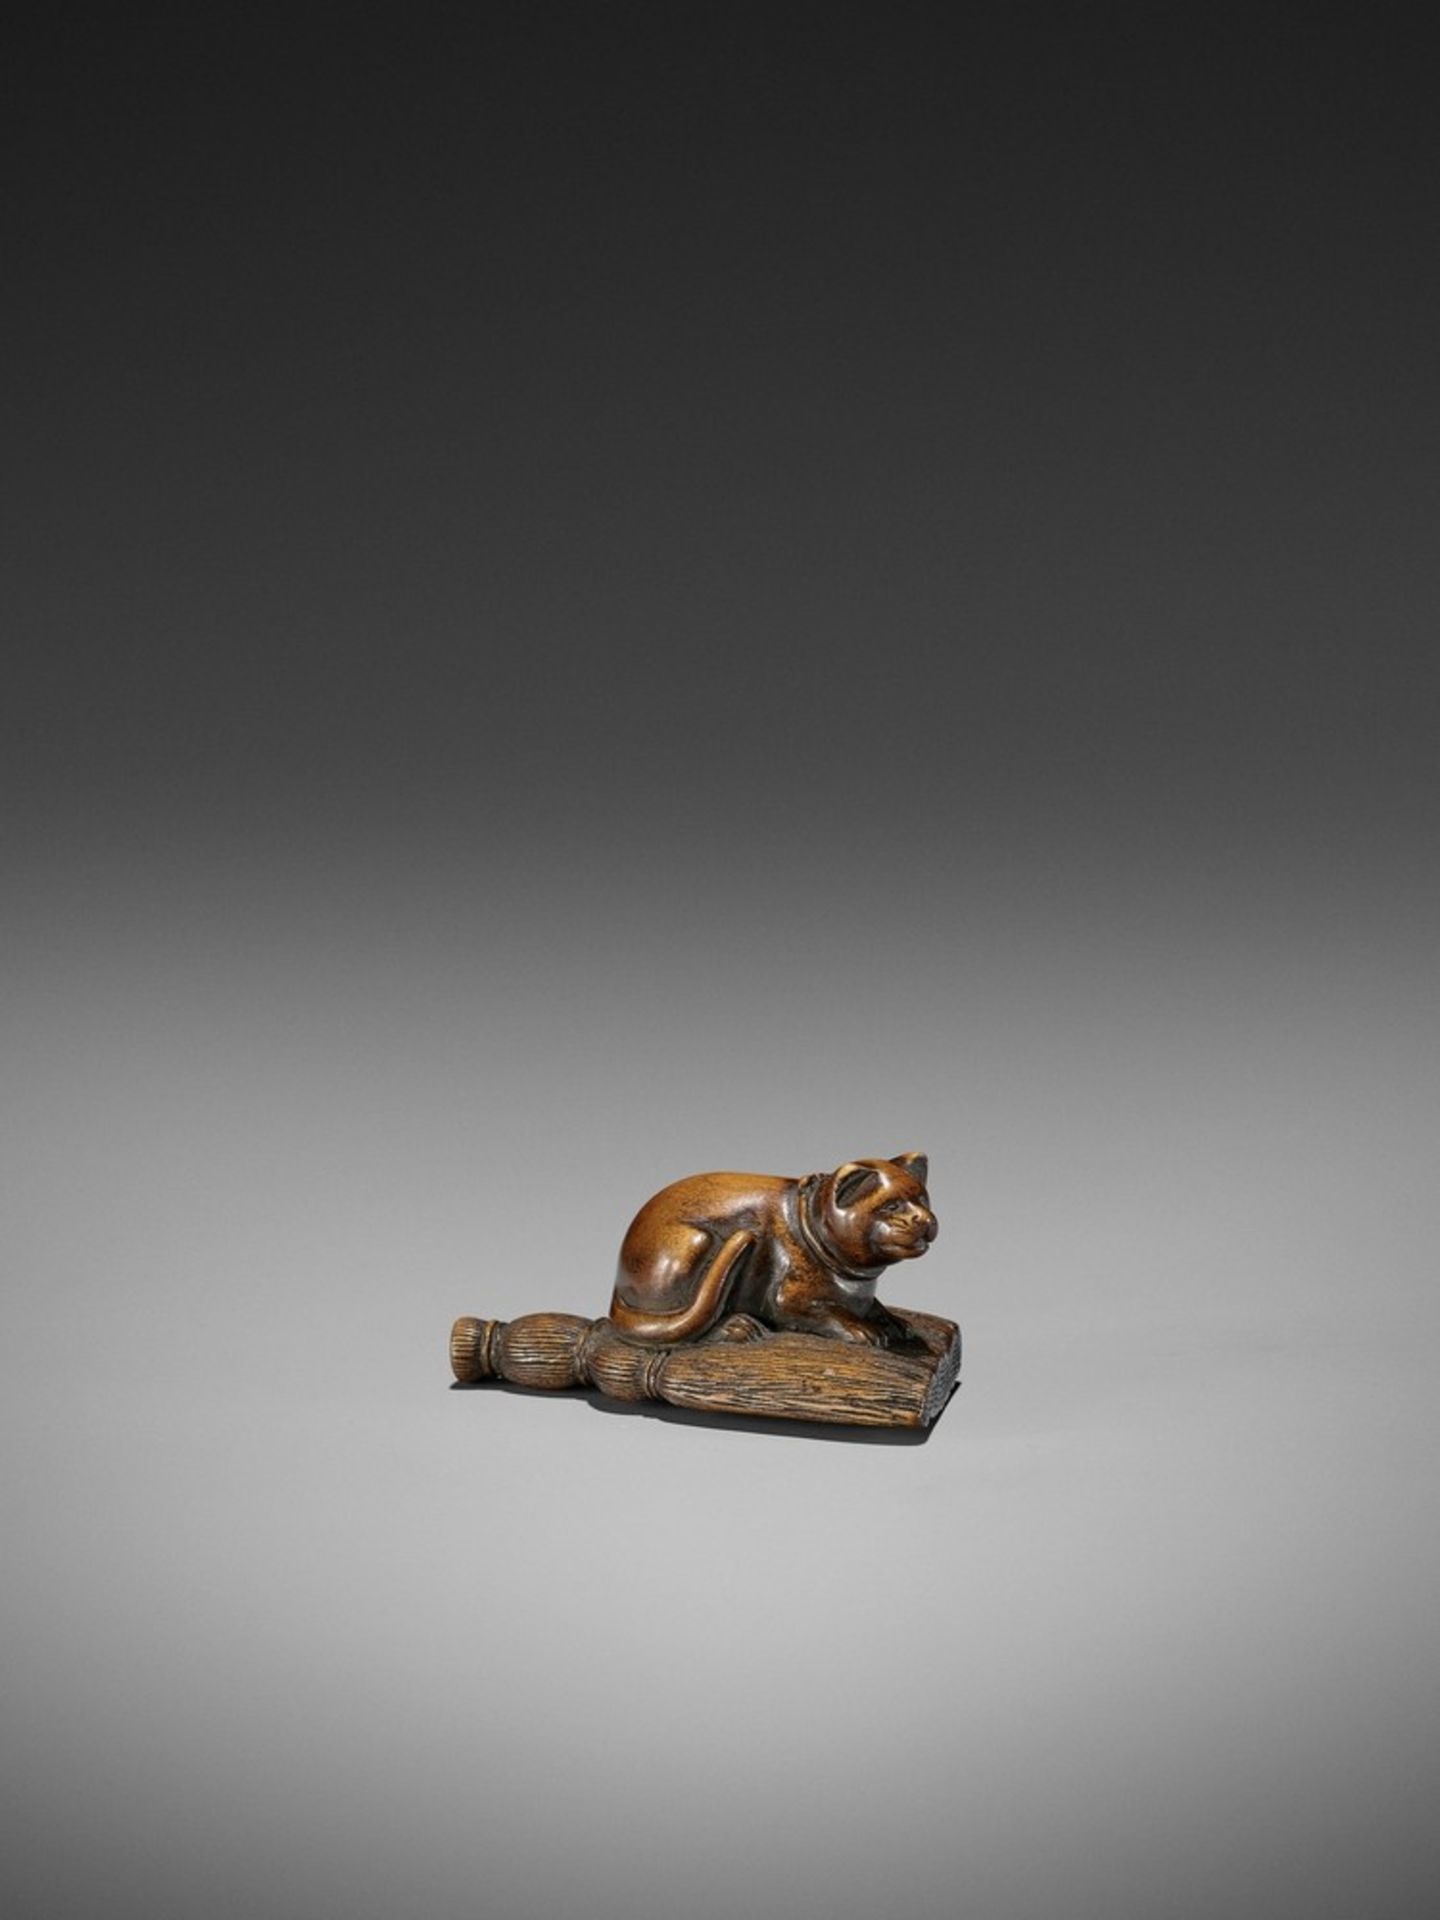 A WOOD NETSUKE OF A CAT ON A BROOM UnsignedJapan, early 19th century, Edo period (1615-1868)Finely